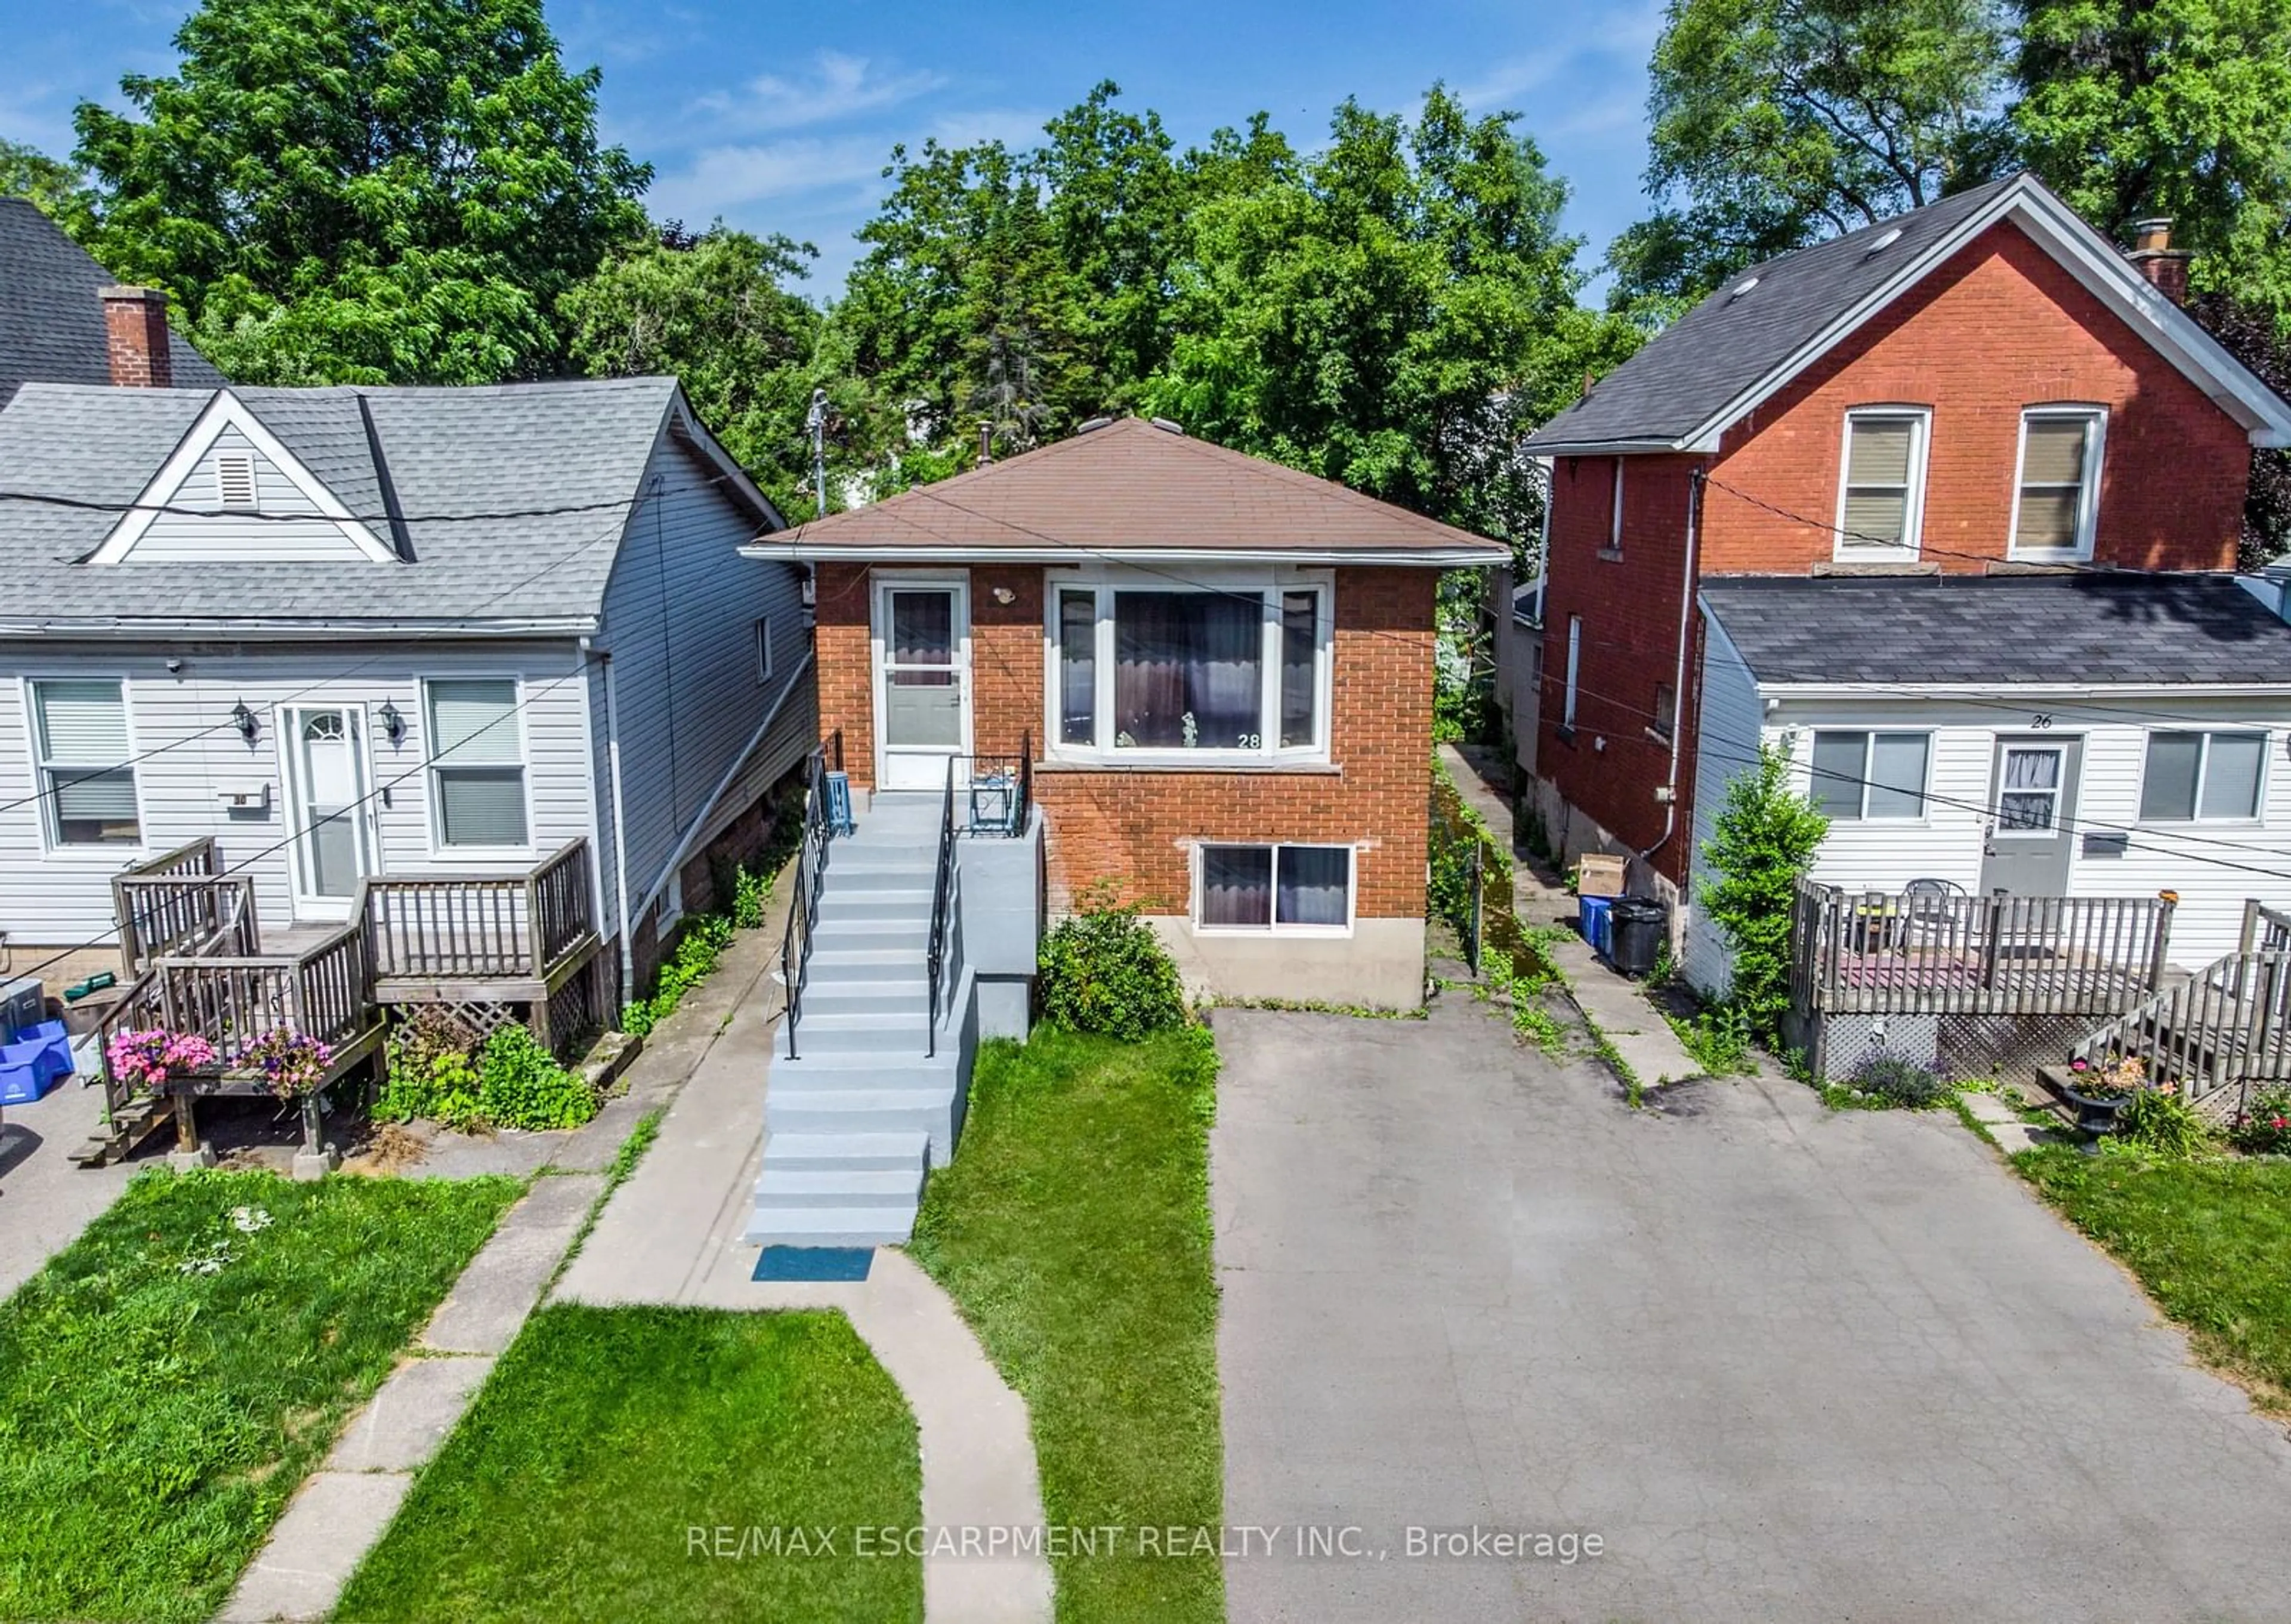 Frontside or backside of a home for 28 East 23rd St, Hamilton Ontario L8V 2W6